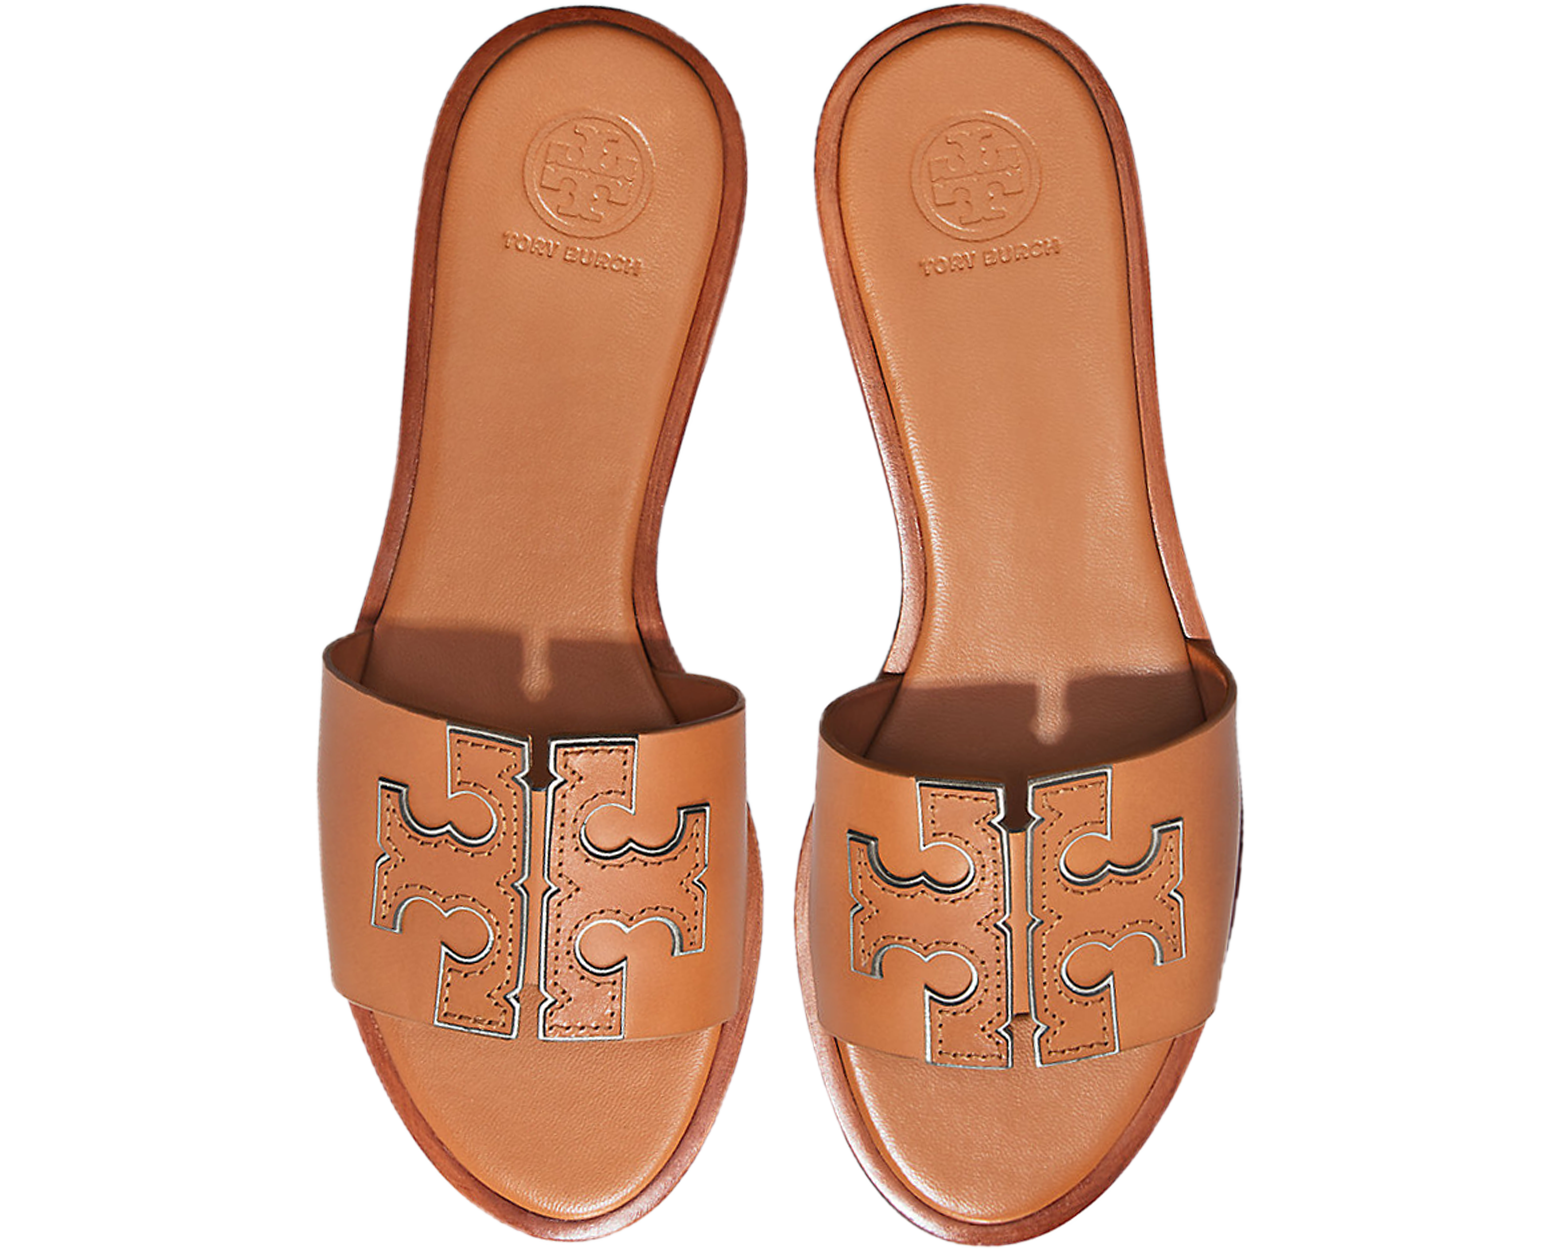 Tory Burch Tan Calf Leather Ines Slides 5 US at FORZIERI